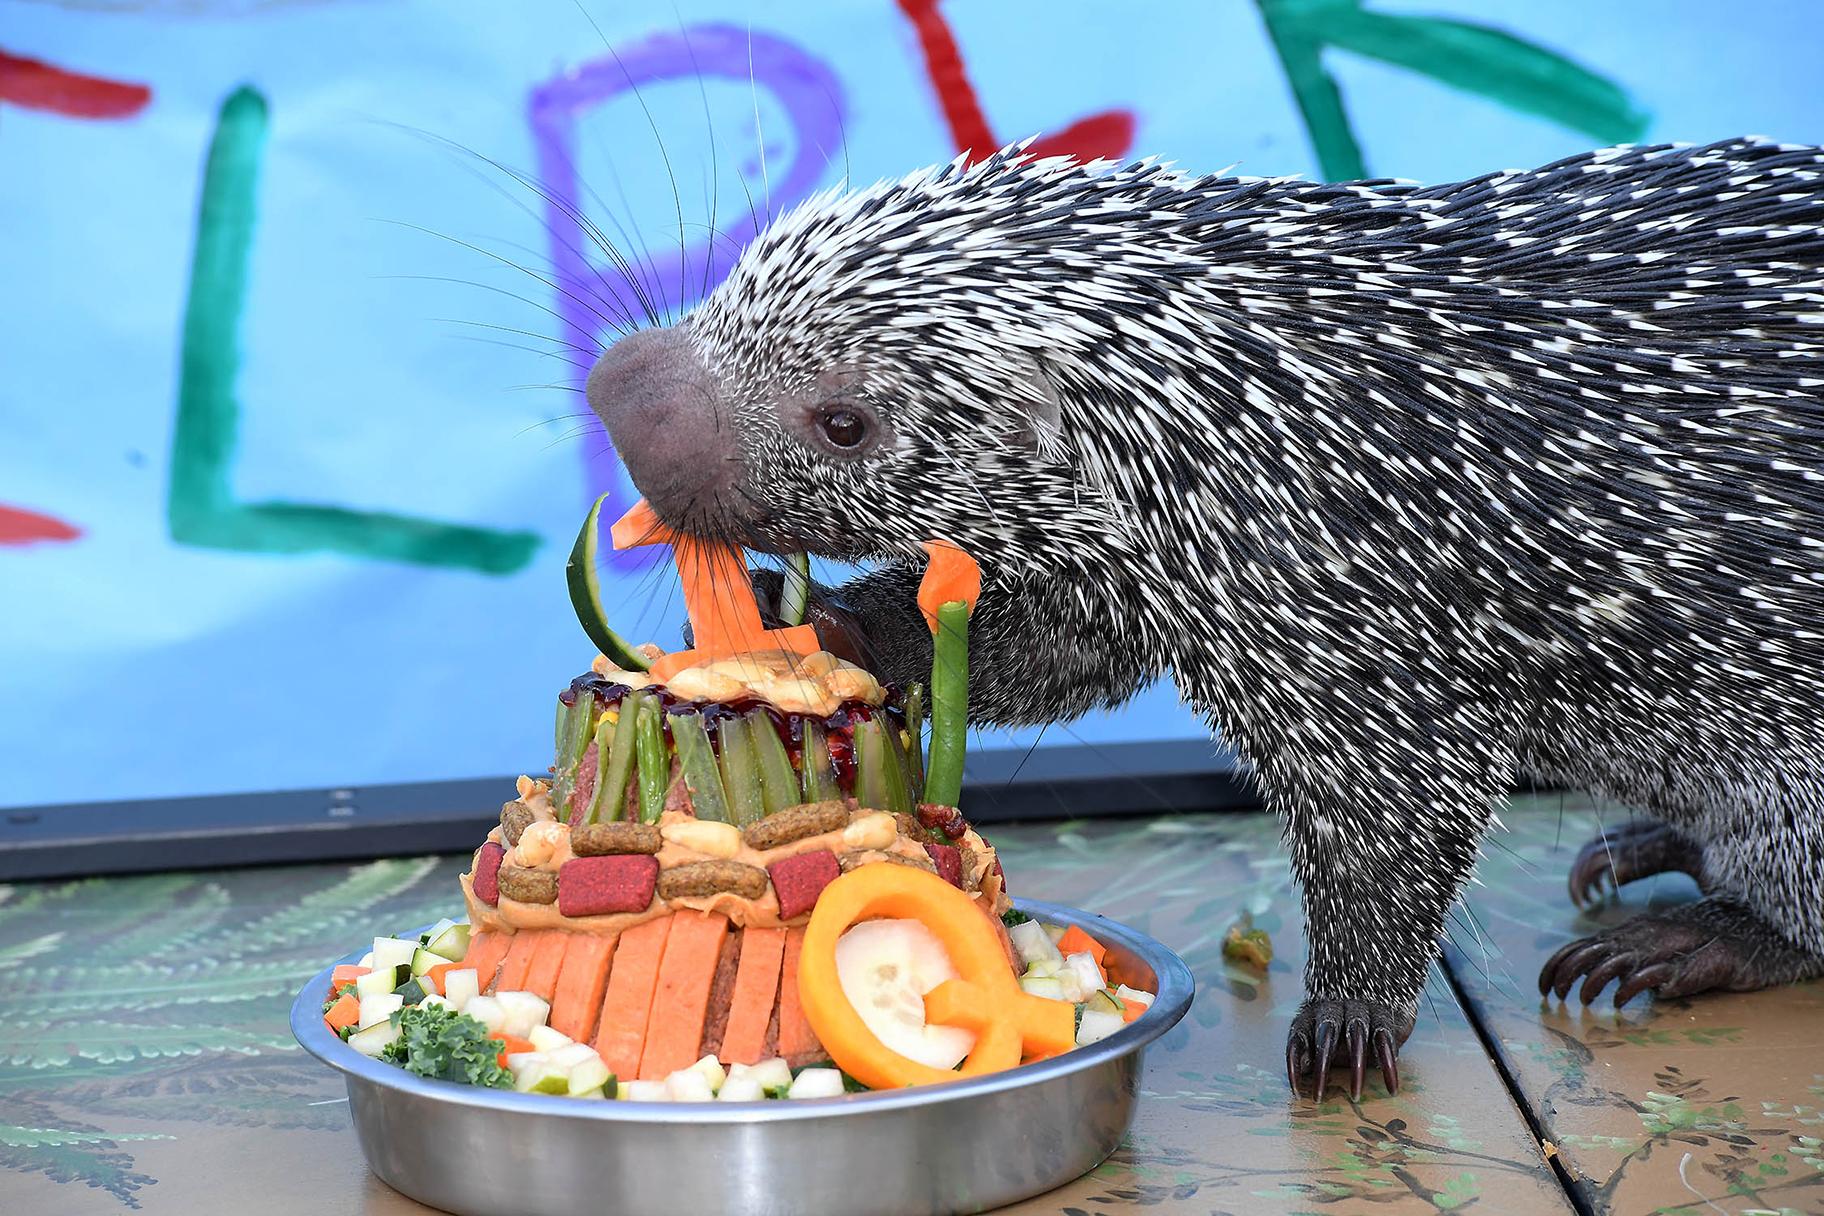 Quilbert, a prehensile-tailed porcupine, celebrated his first birthday at Brookfield Zoo with a specially made cake. (Jim Schulz / Chicago Zoological Society) 